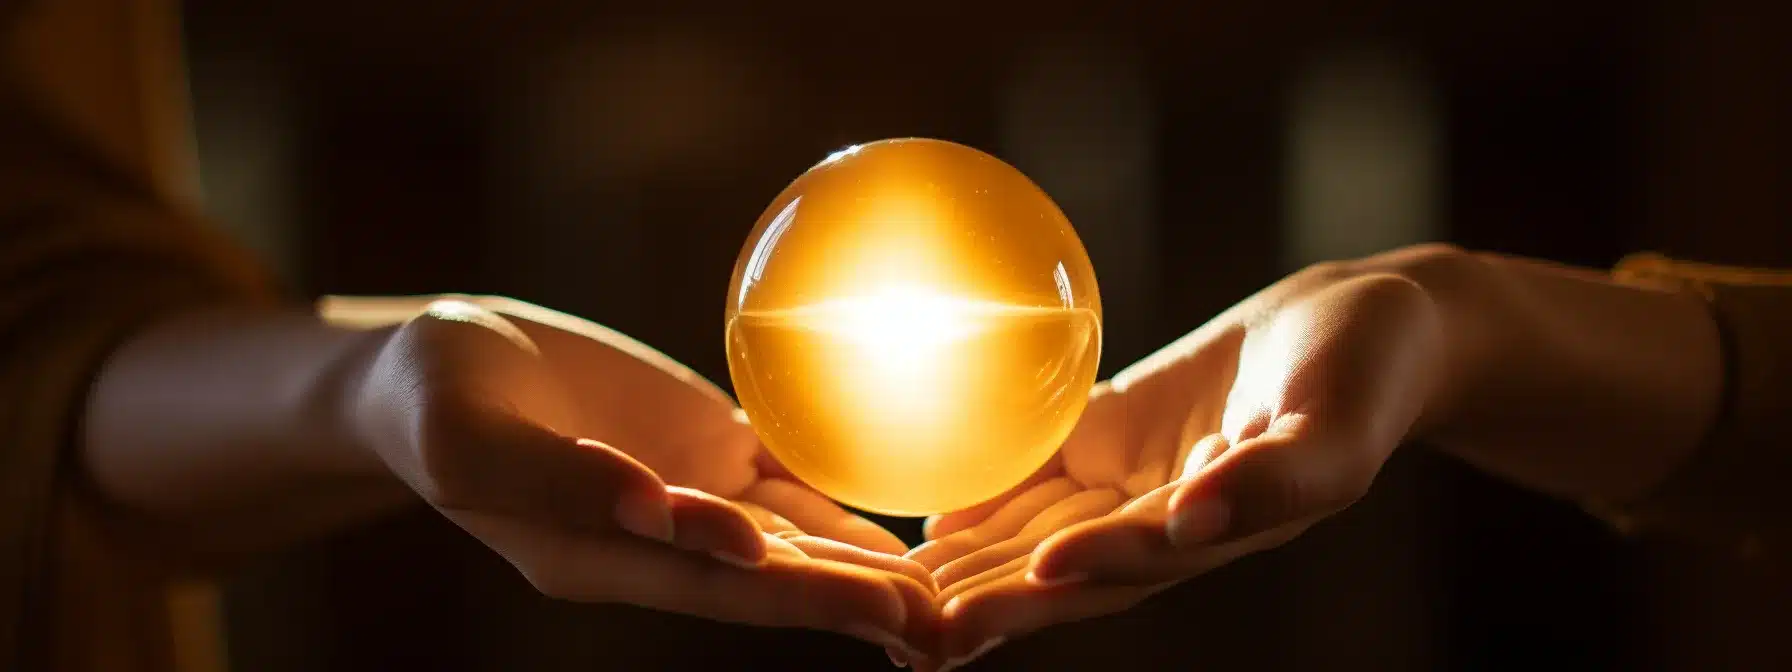 A Person Holding A Golden Pearl In Their Hand.